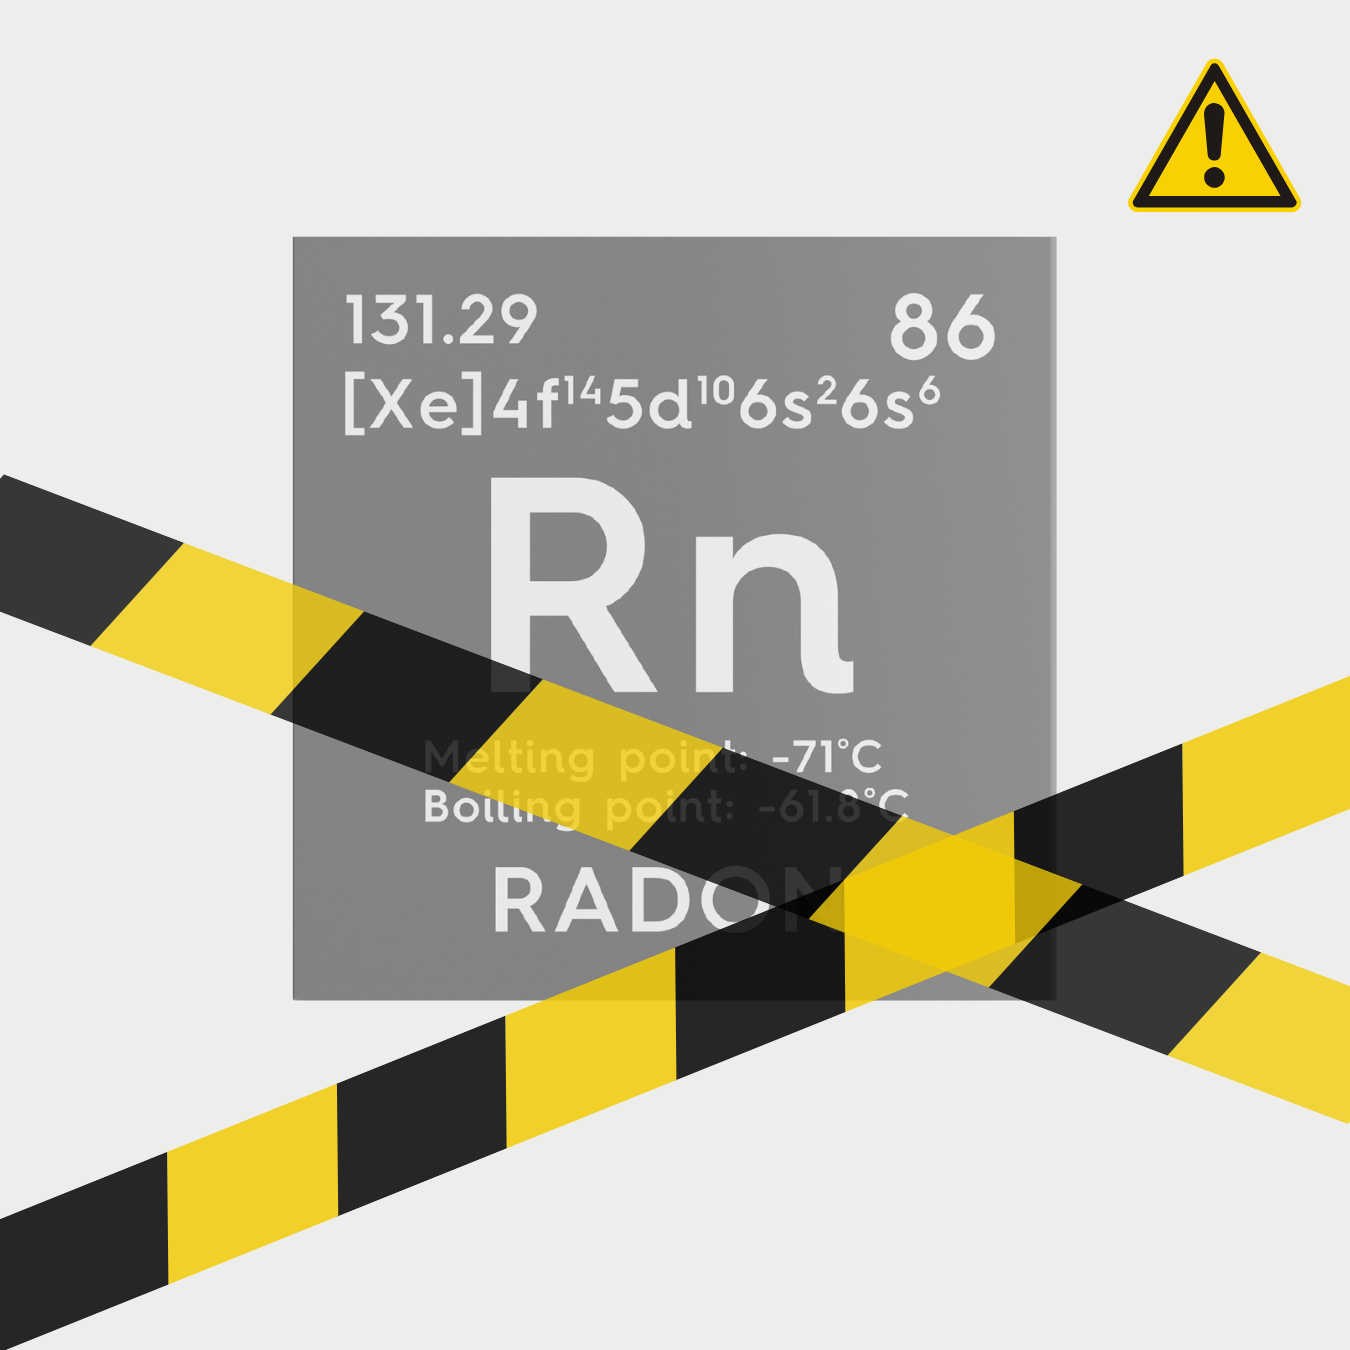 Why is Radon Testing Important?